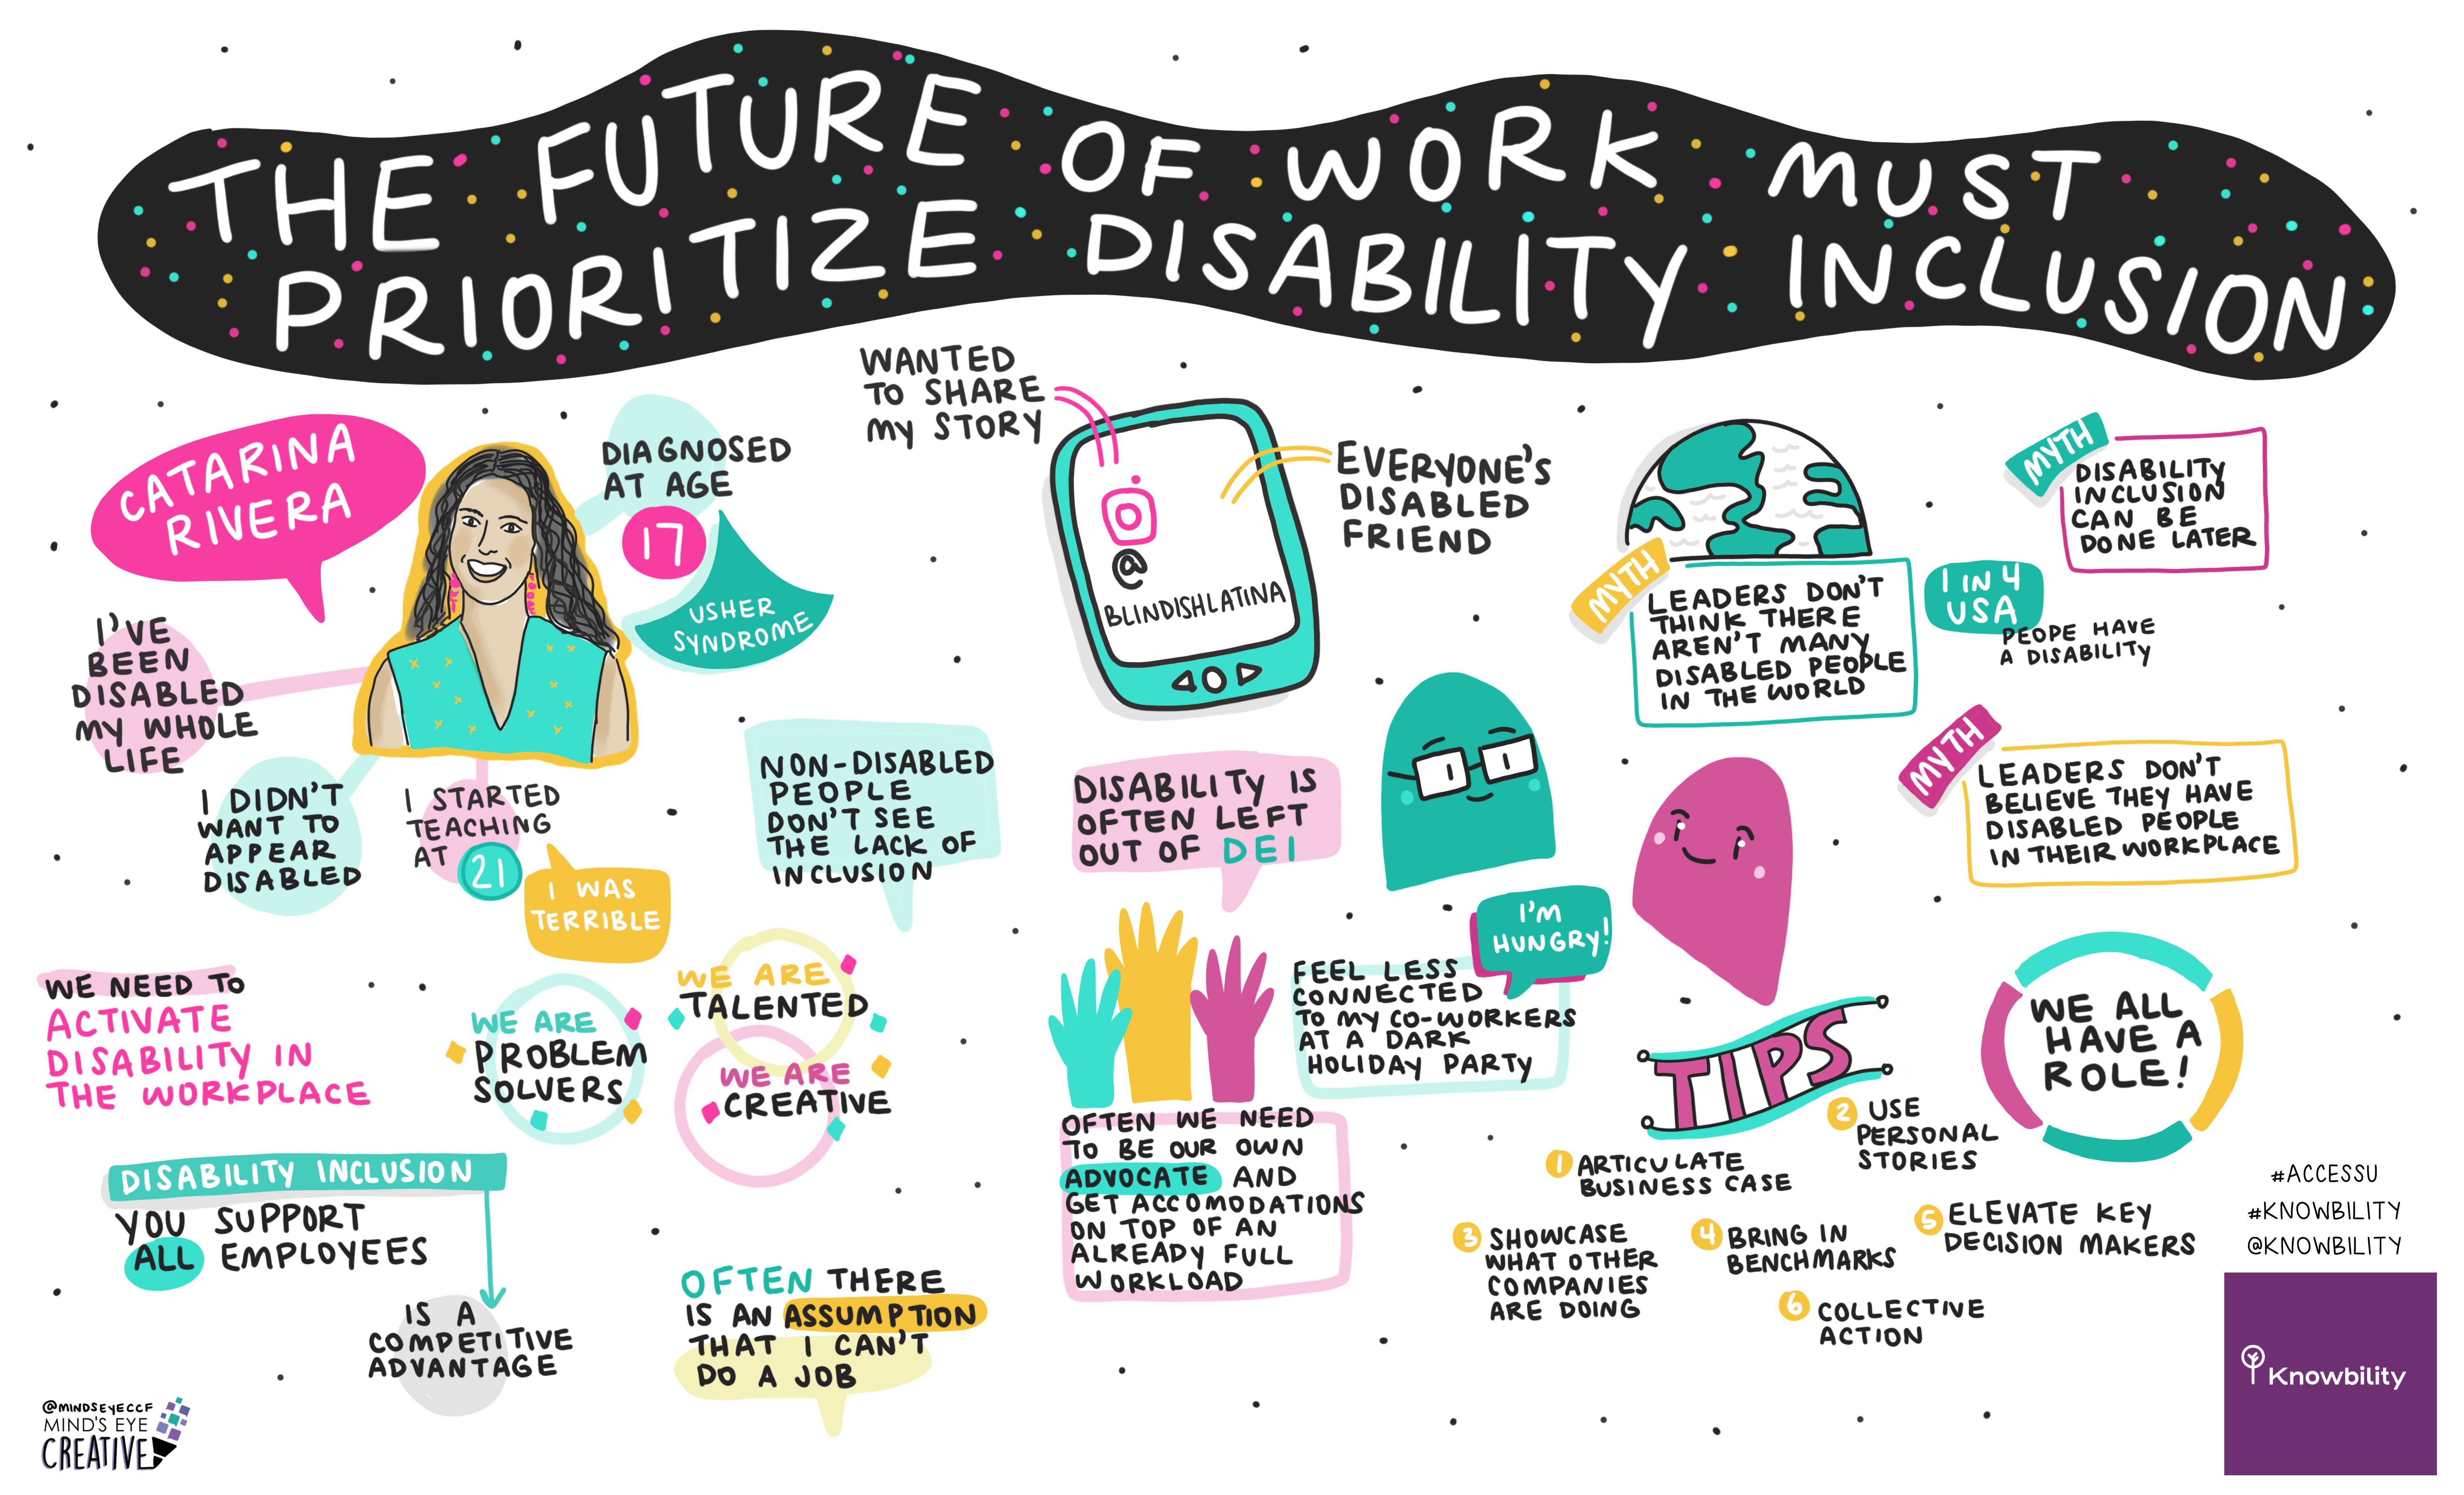 Sketchnote for the presentation titled, “The Future of Work Must Prioritize Disability Inclusion” by Catarina Rivera at the AccessU event. 